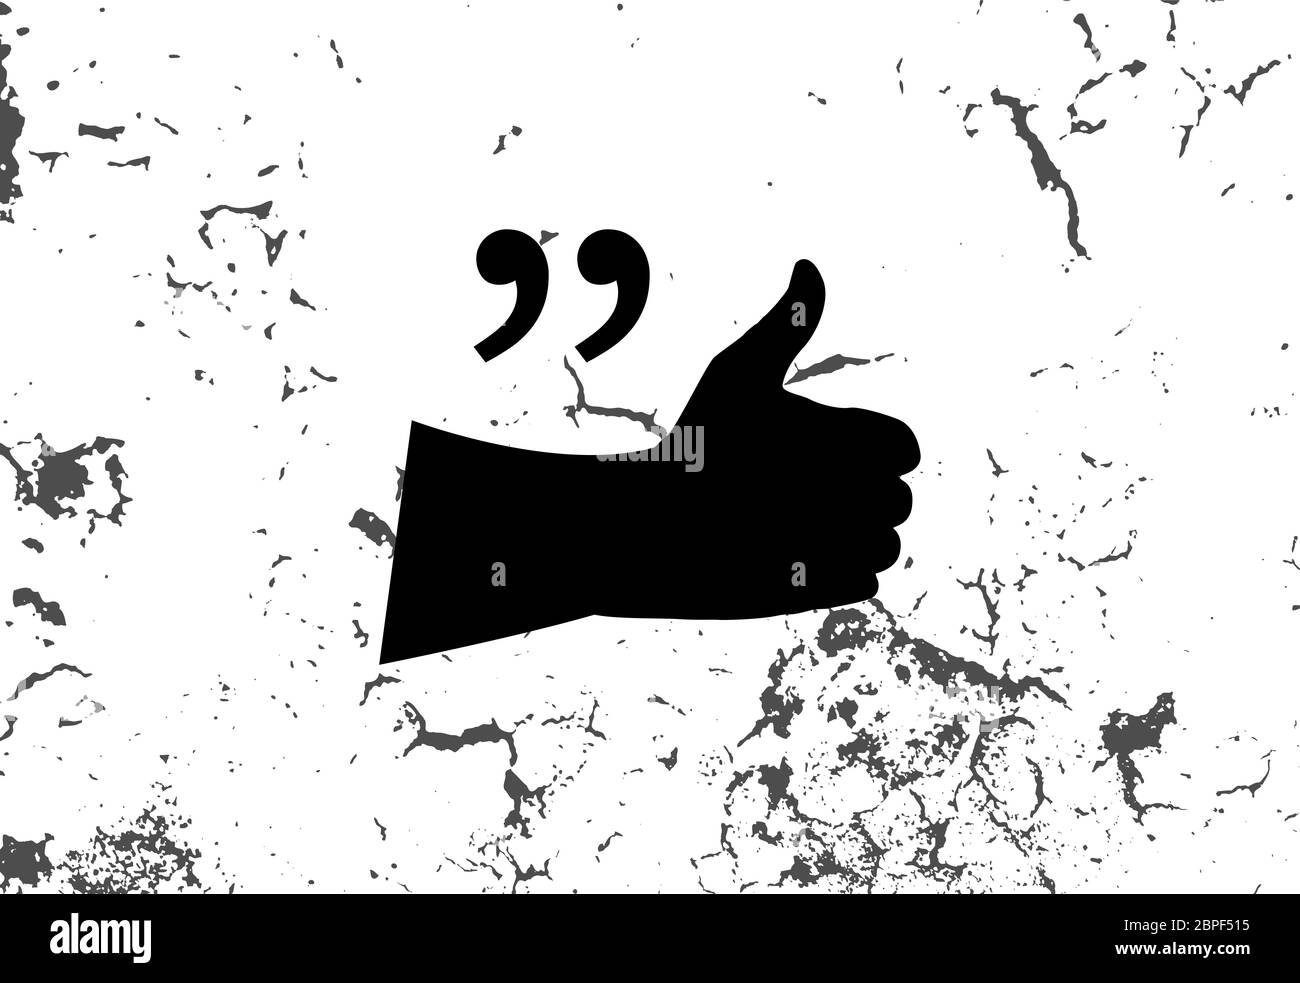 Quotation Mark Speech Bubble. Quote sign icon. Abstract background. Stock Photo